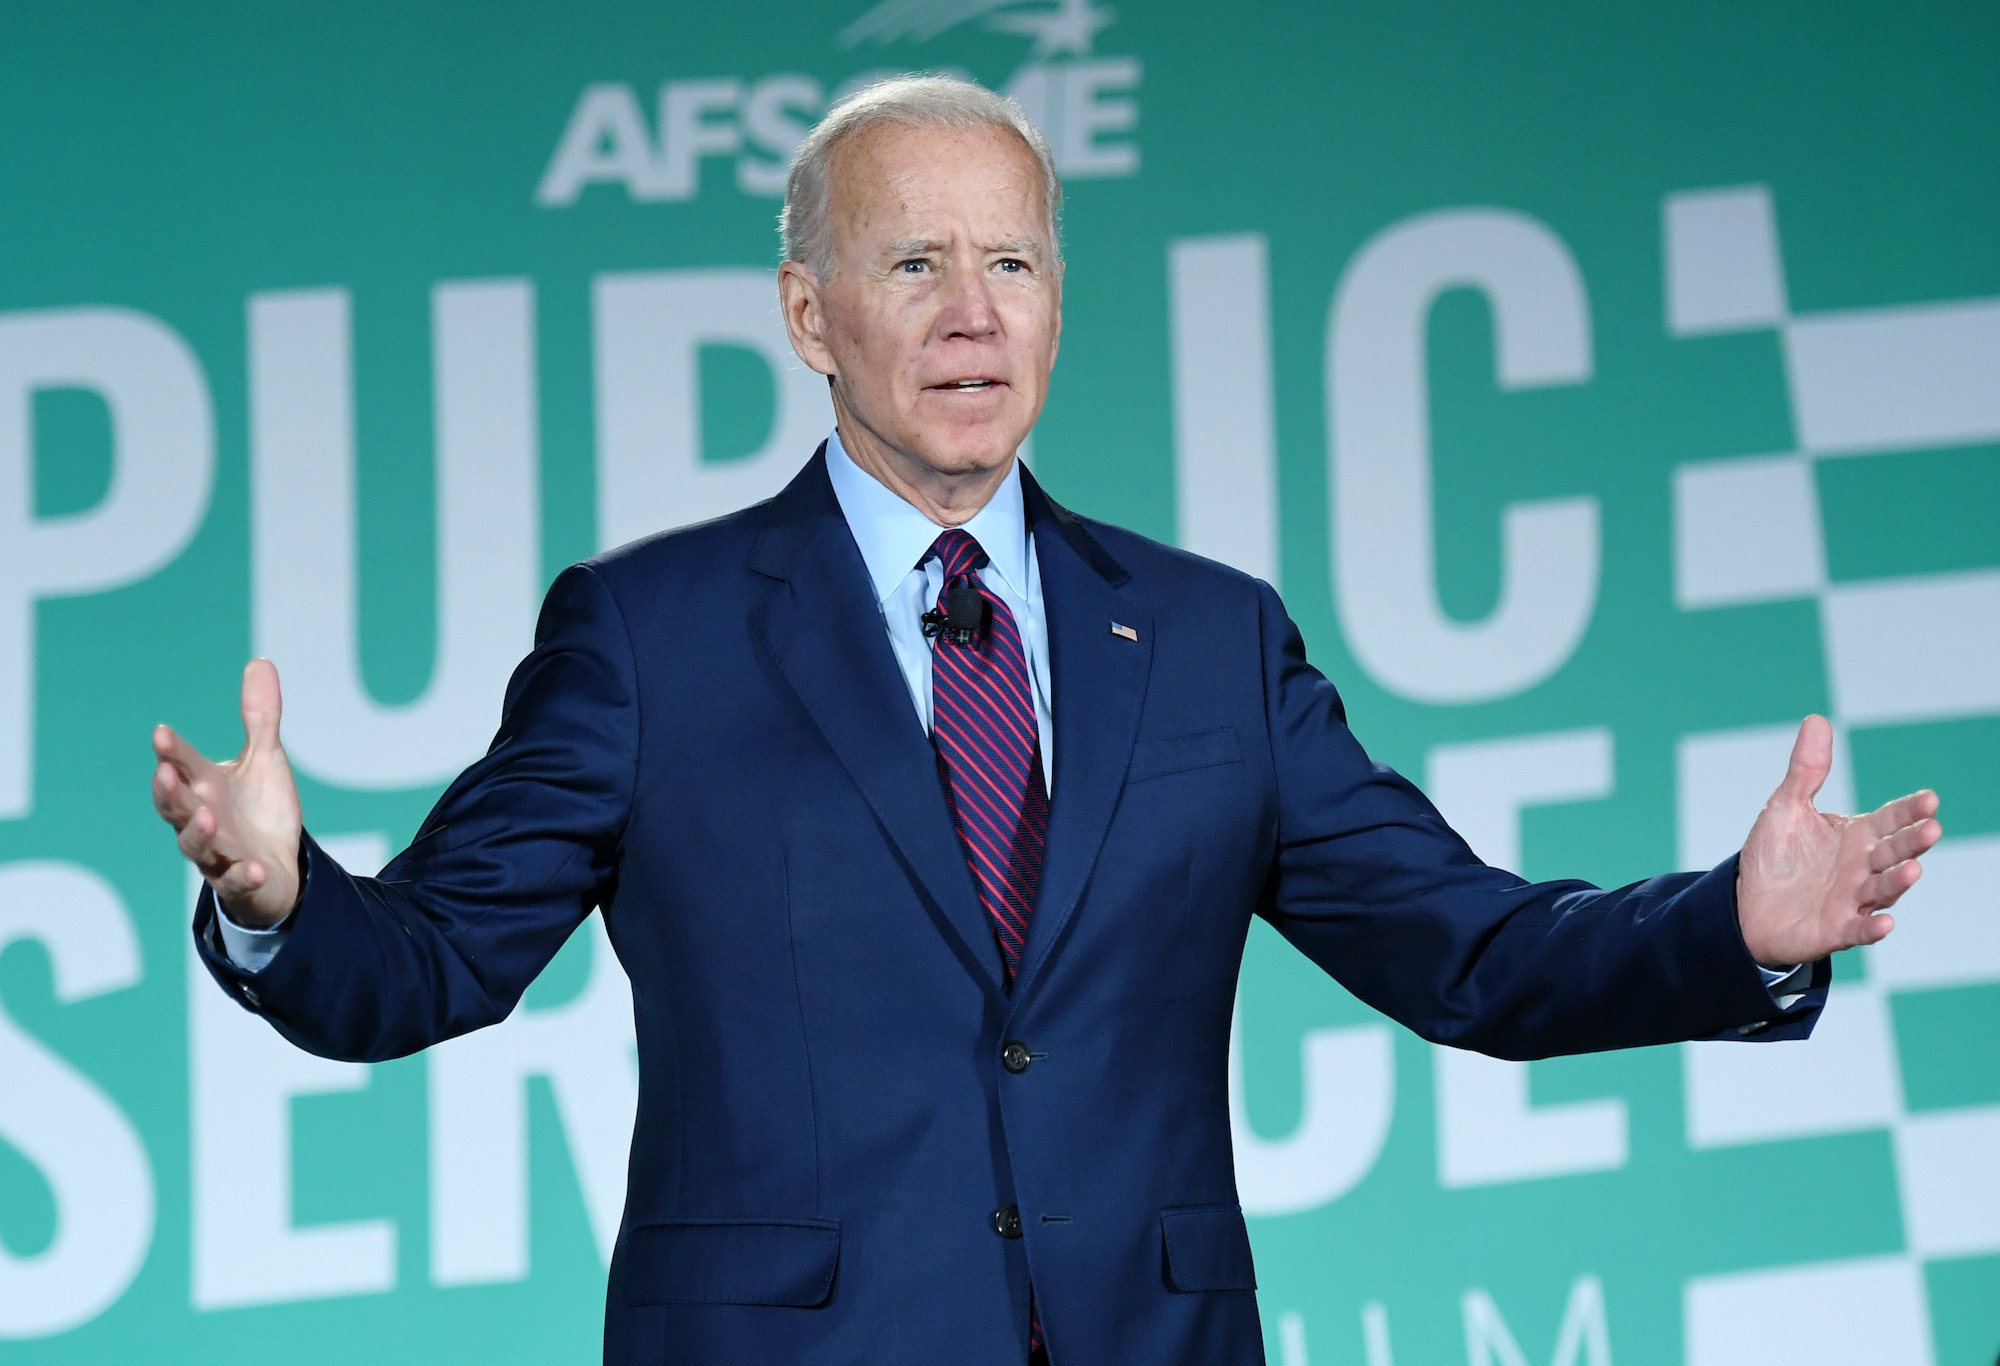 Saunders: President Biden is ‘most pro-union, pro-worker president of our lifetimes’